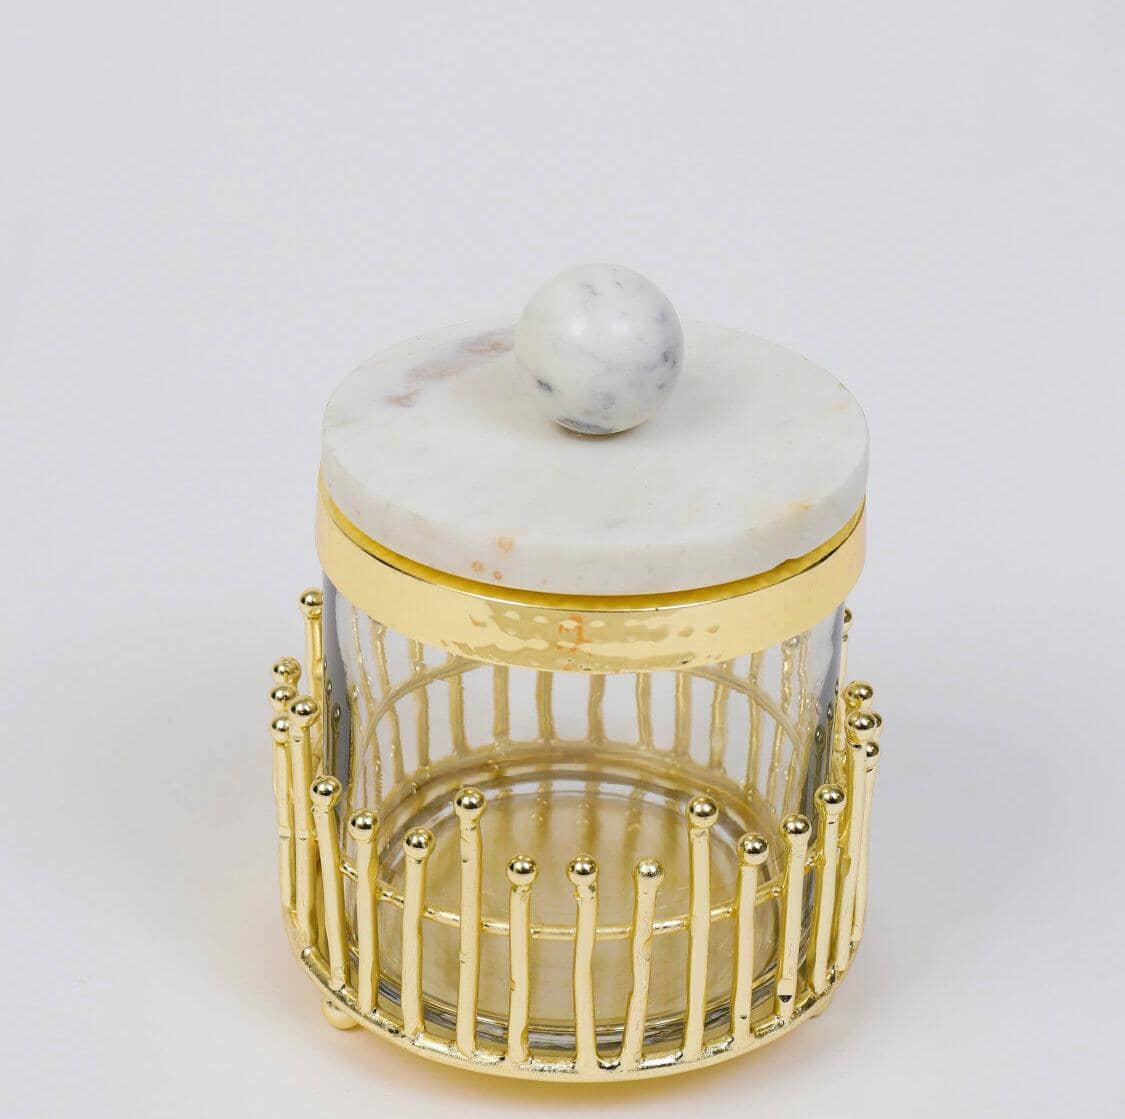 Canister with Gold Straight Cut Design and Marble Lid Canisters High Class Touch - Home Decor Small 